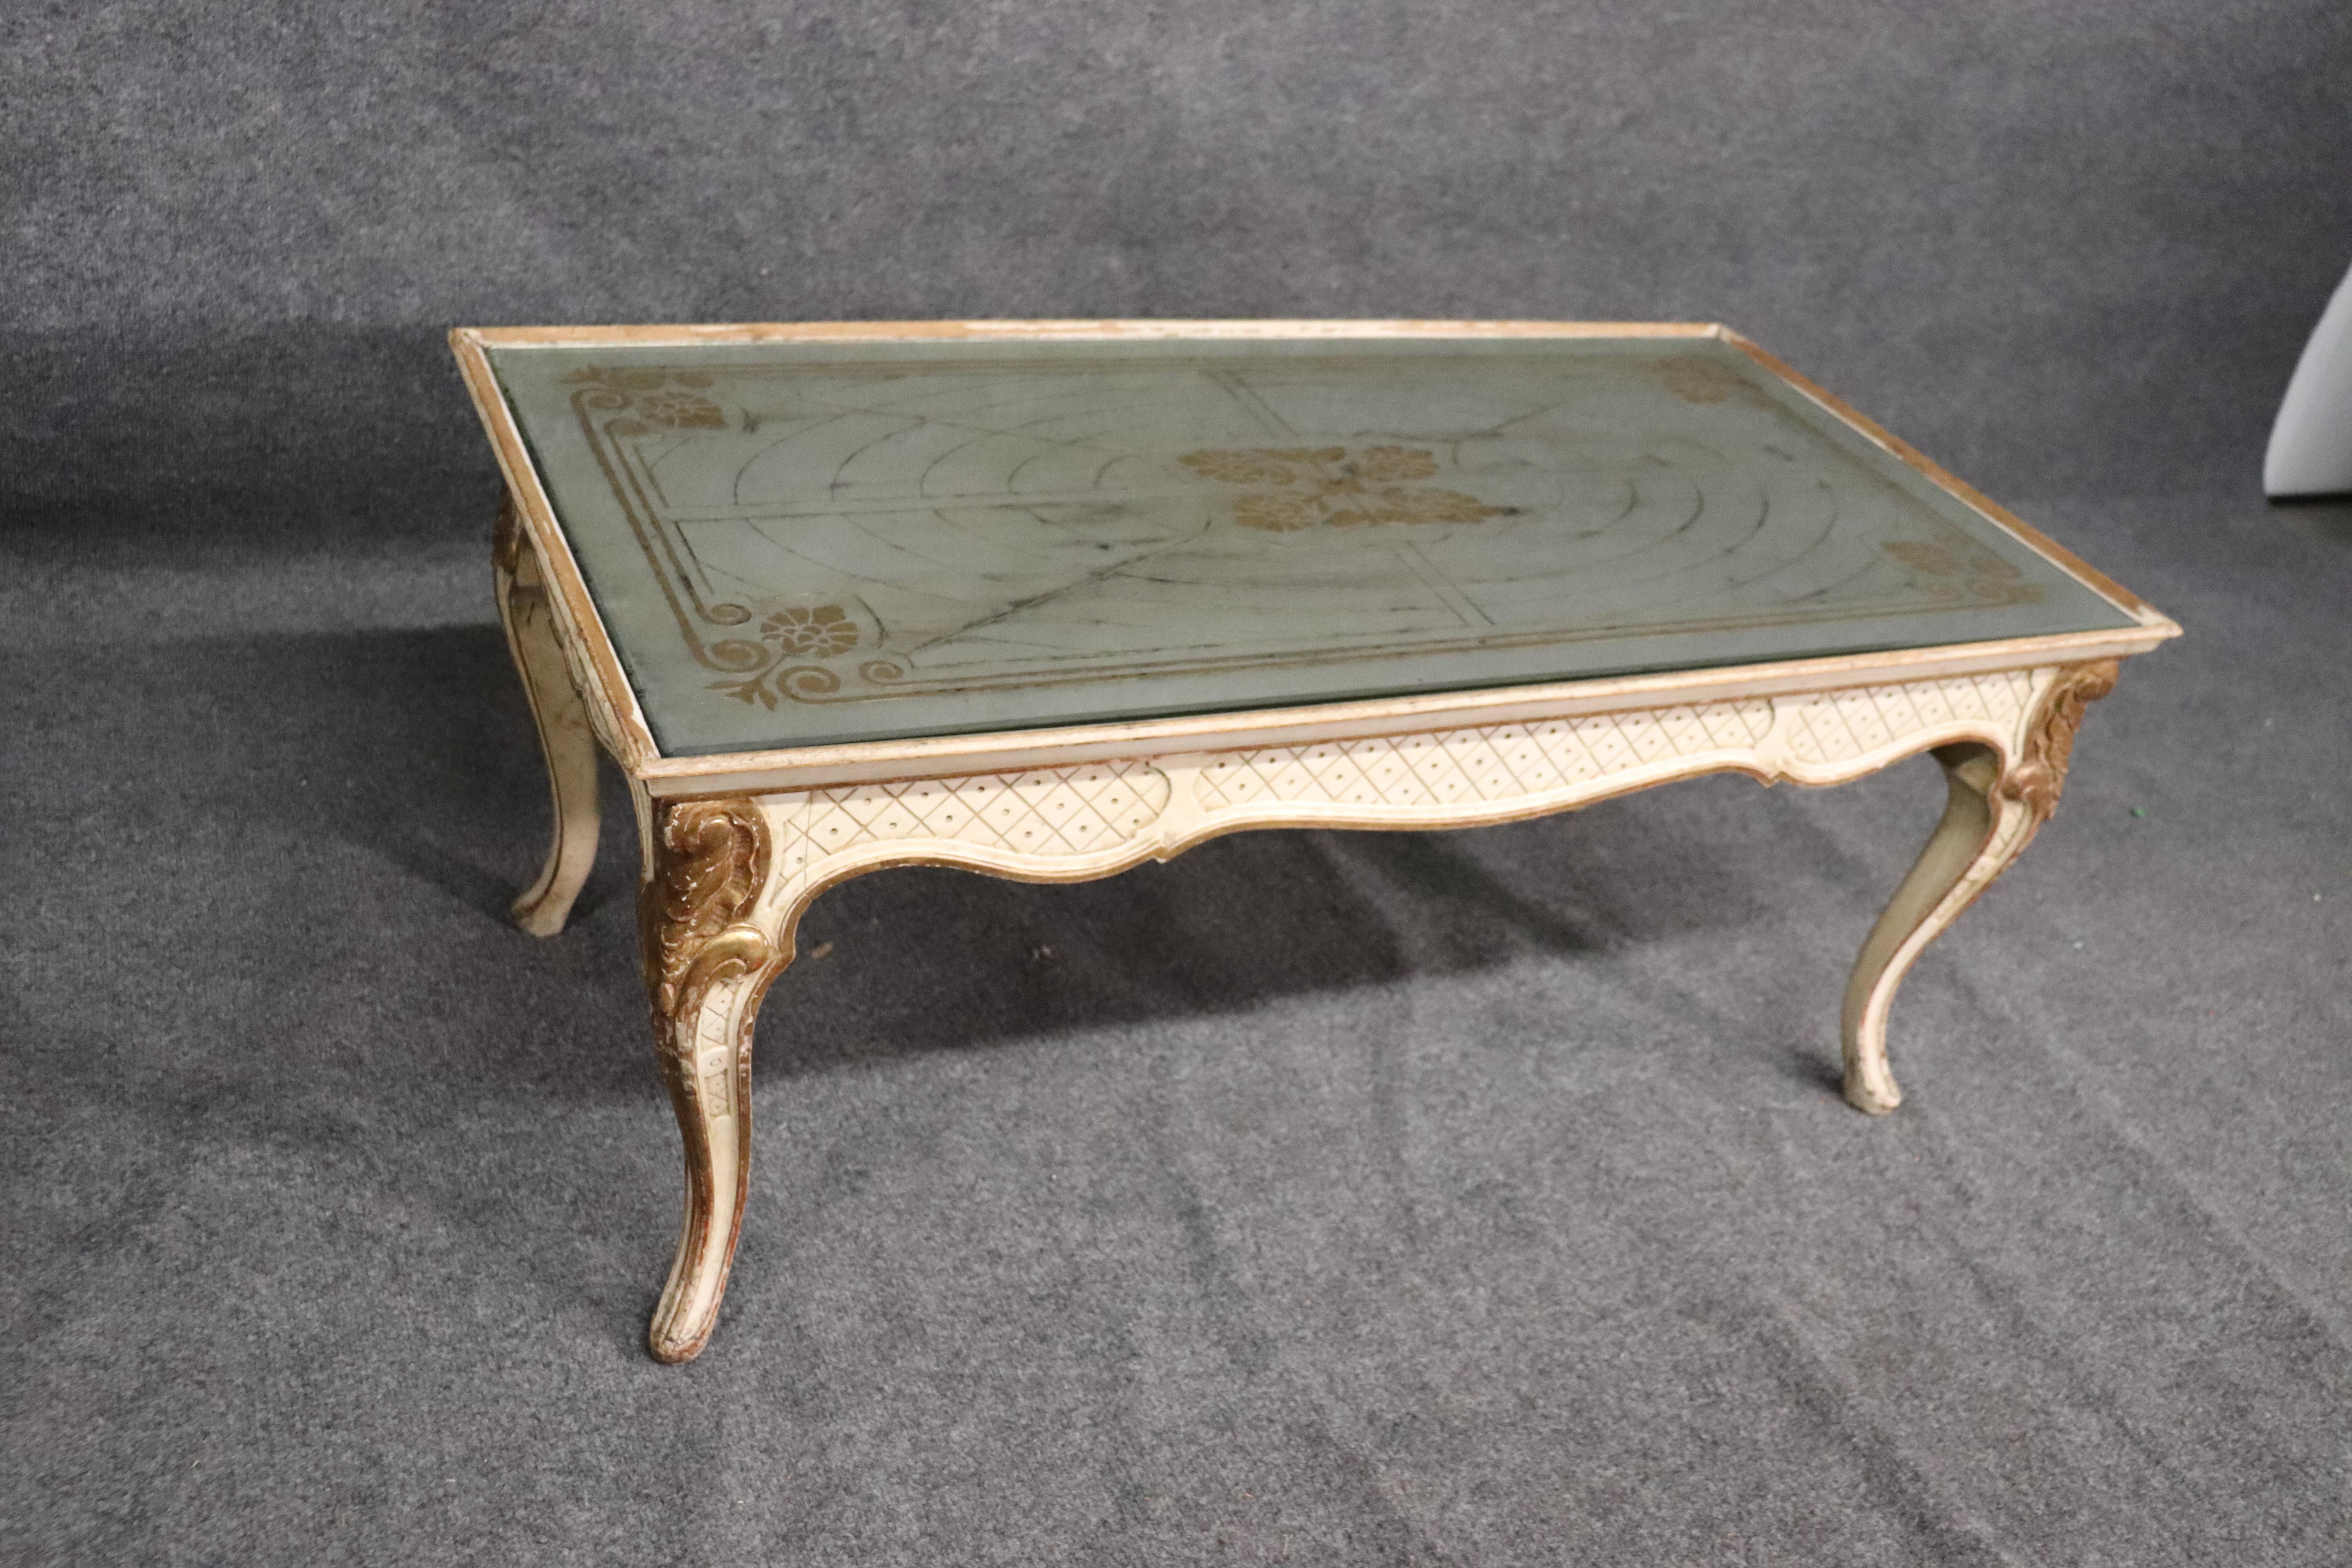 This is a gorgeous Maison Jansen coffee table that has an original gold and silver eglomise top. The table is designed in the Louis XV manner and is in good condition with the emobossed Jansen stamp. Dates to the 1950s era. Measures 41 wide x 22